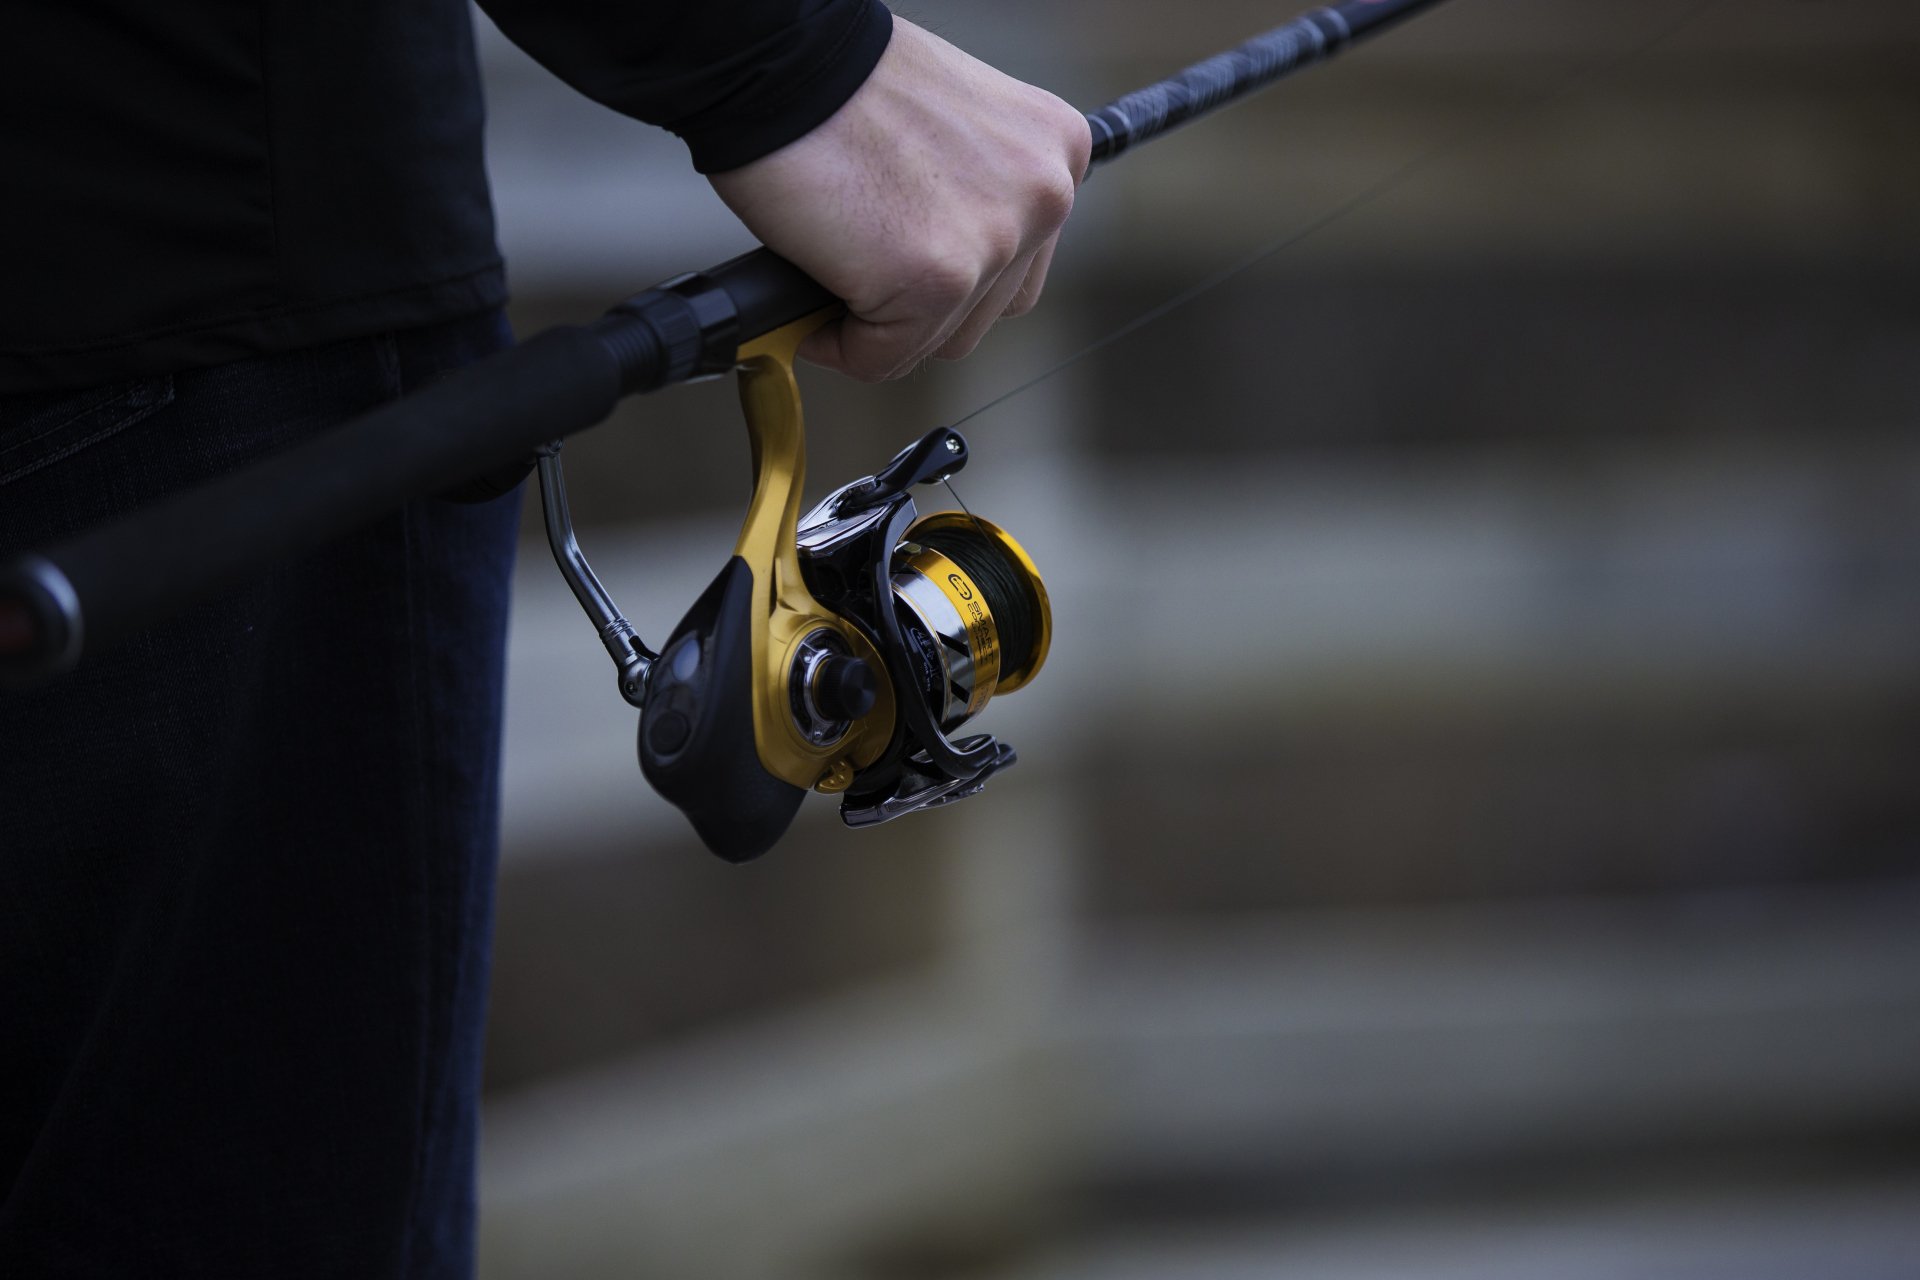 Motion-detecting spinning reel pings your phone when the fish bite